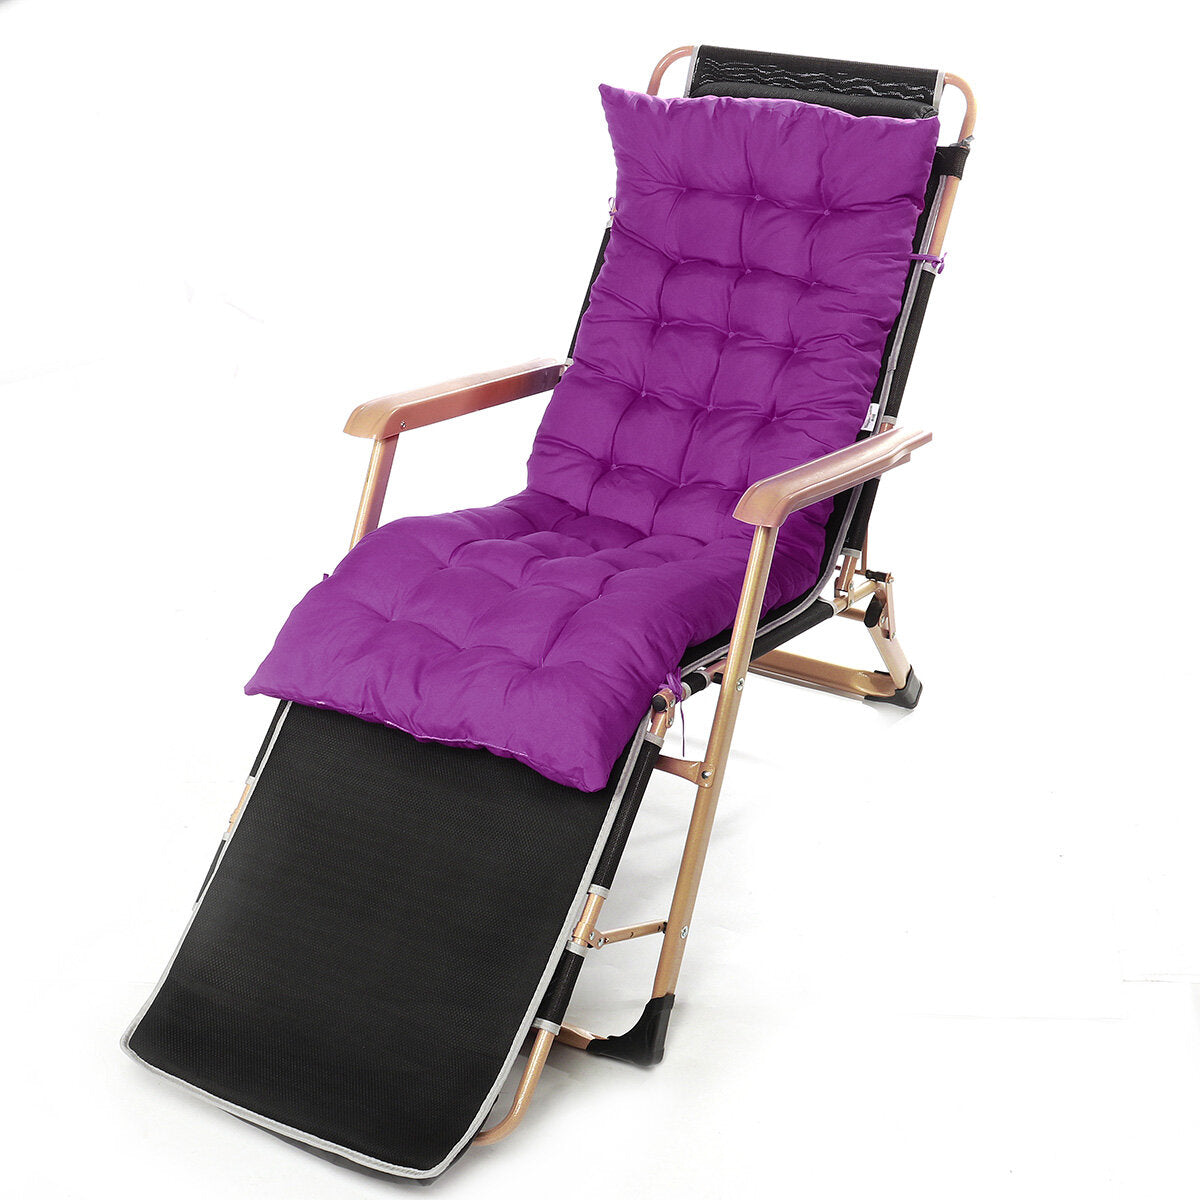 50 Inch Lounge Bench Cushion Indoor Outdoor Chaise Lounger Cushions Rocking High Back Chair Cushion for Home Office Sofa